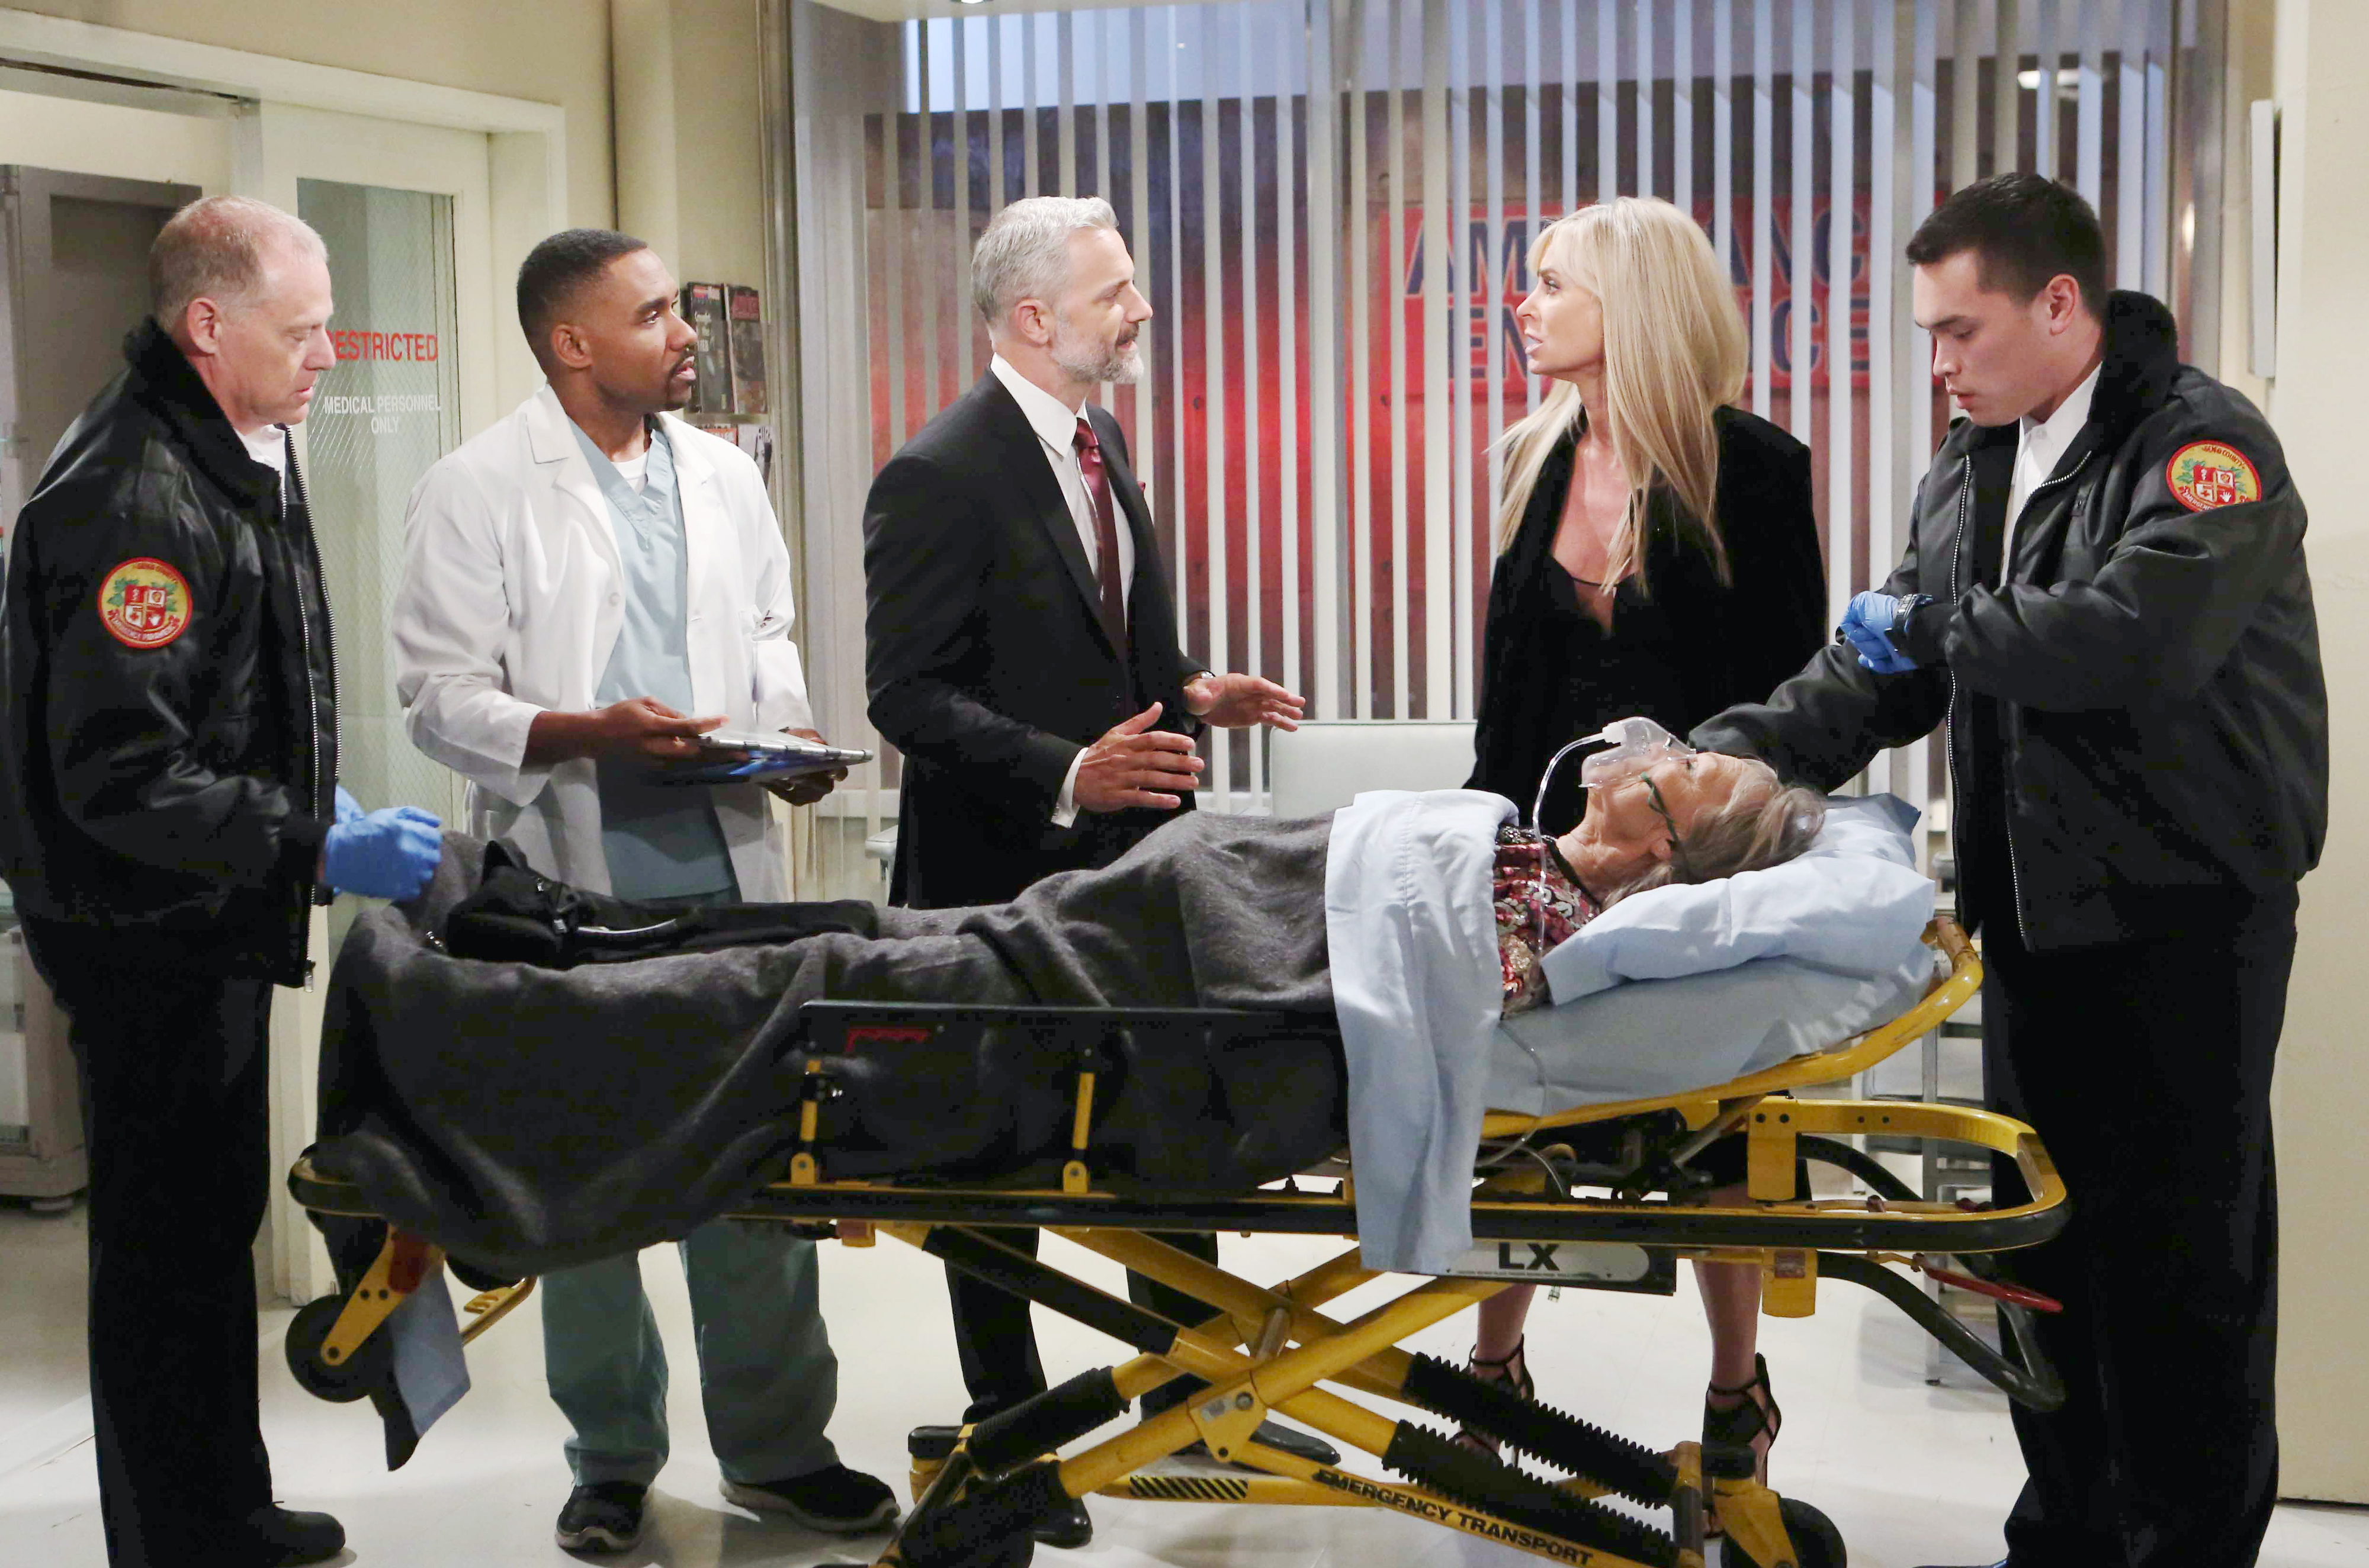 Y&R Spoilers: Rivals unite as a life hangs in the balance. 